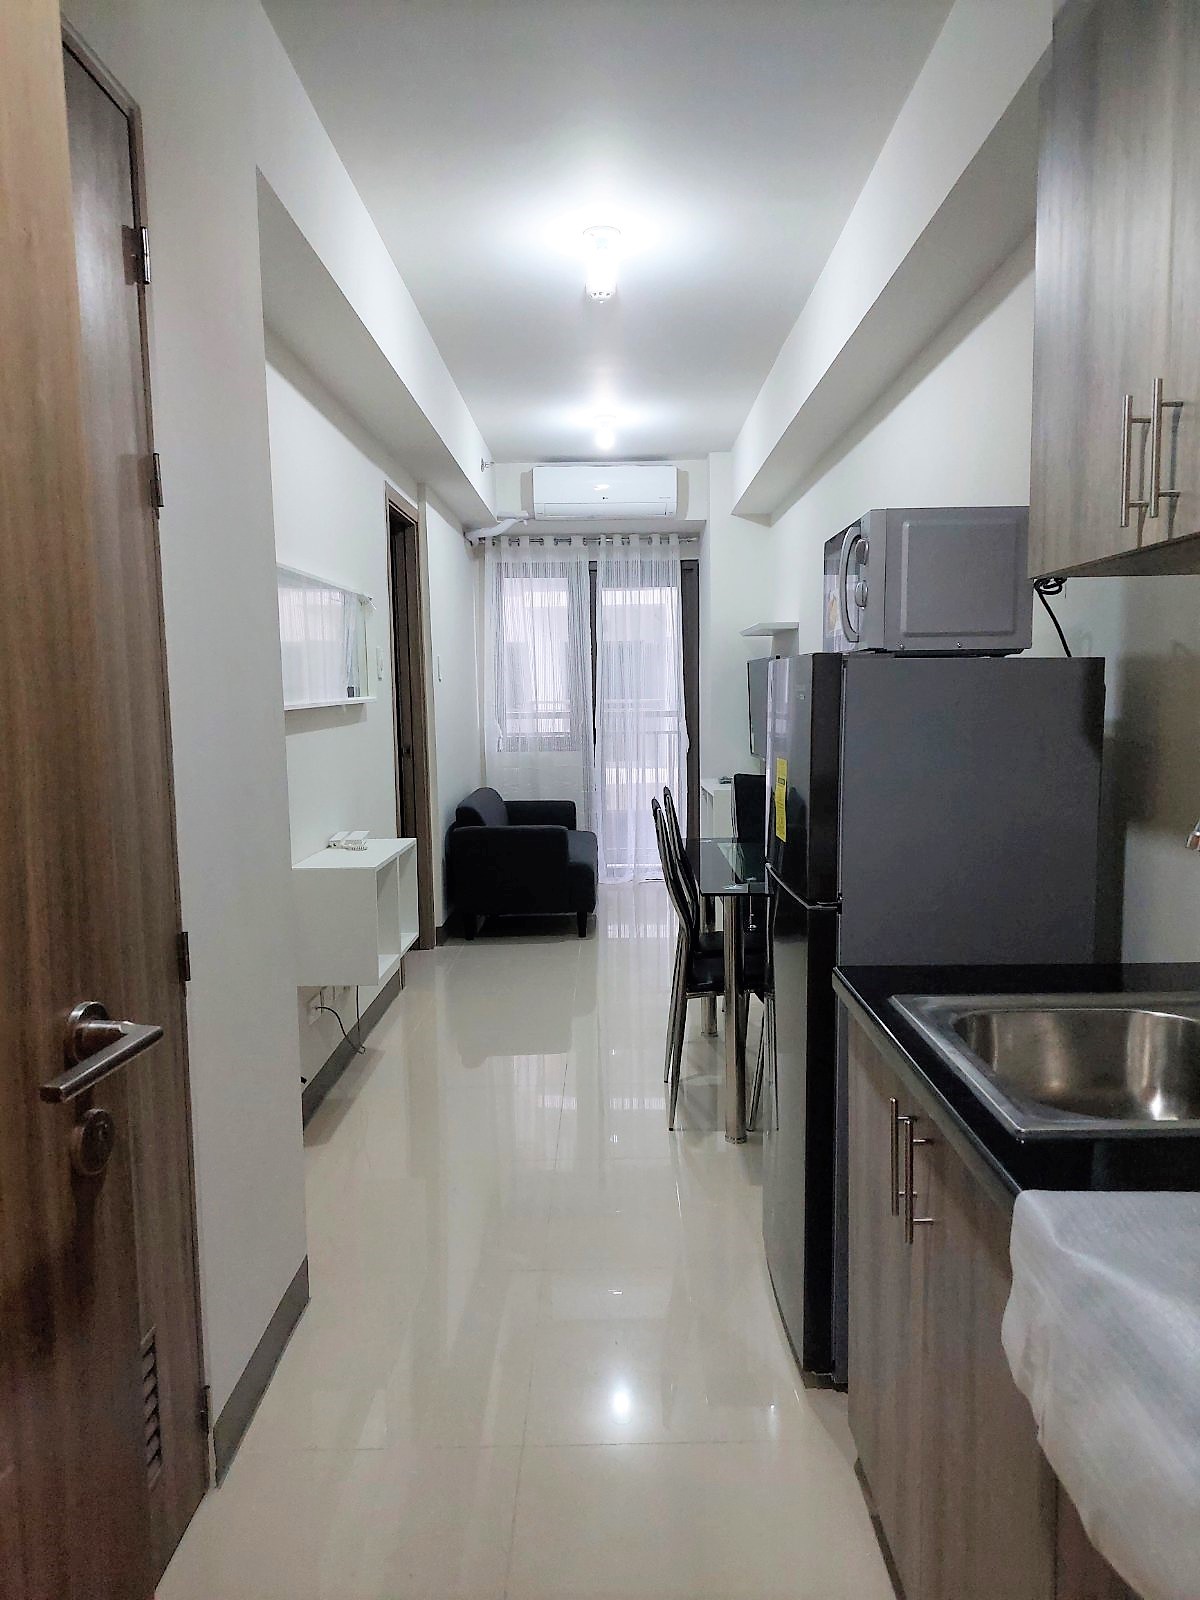 Condo Unit For Rent – 6th Floor at S Residences